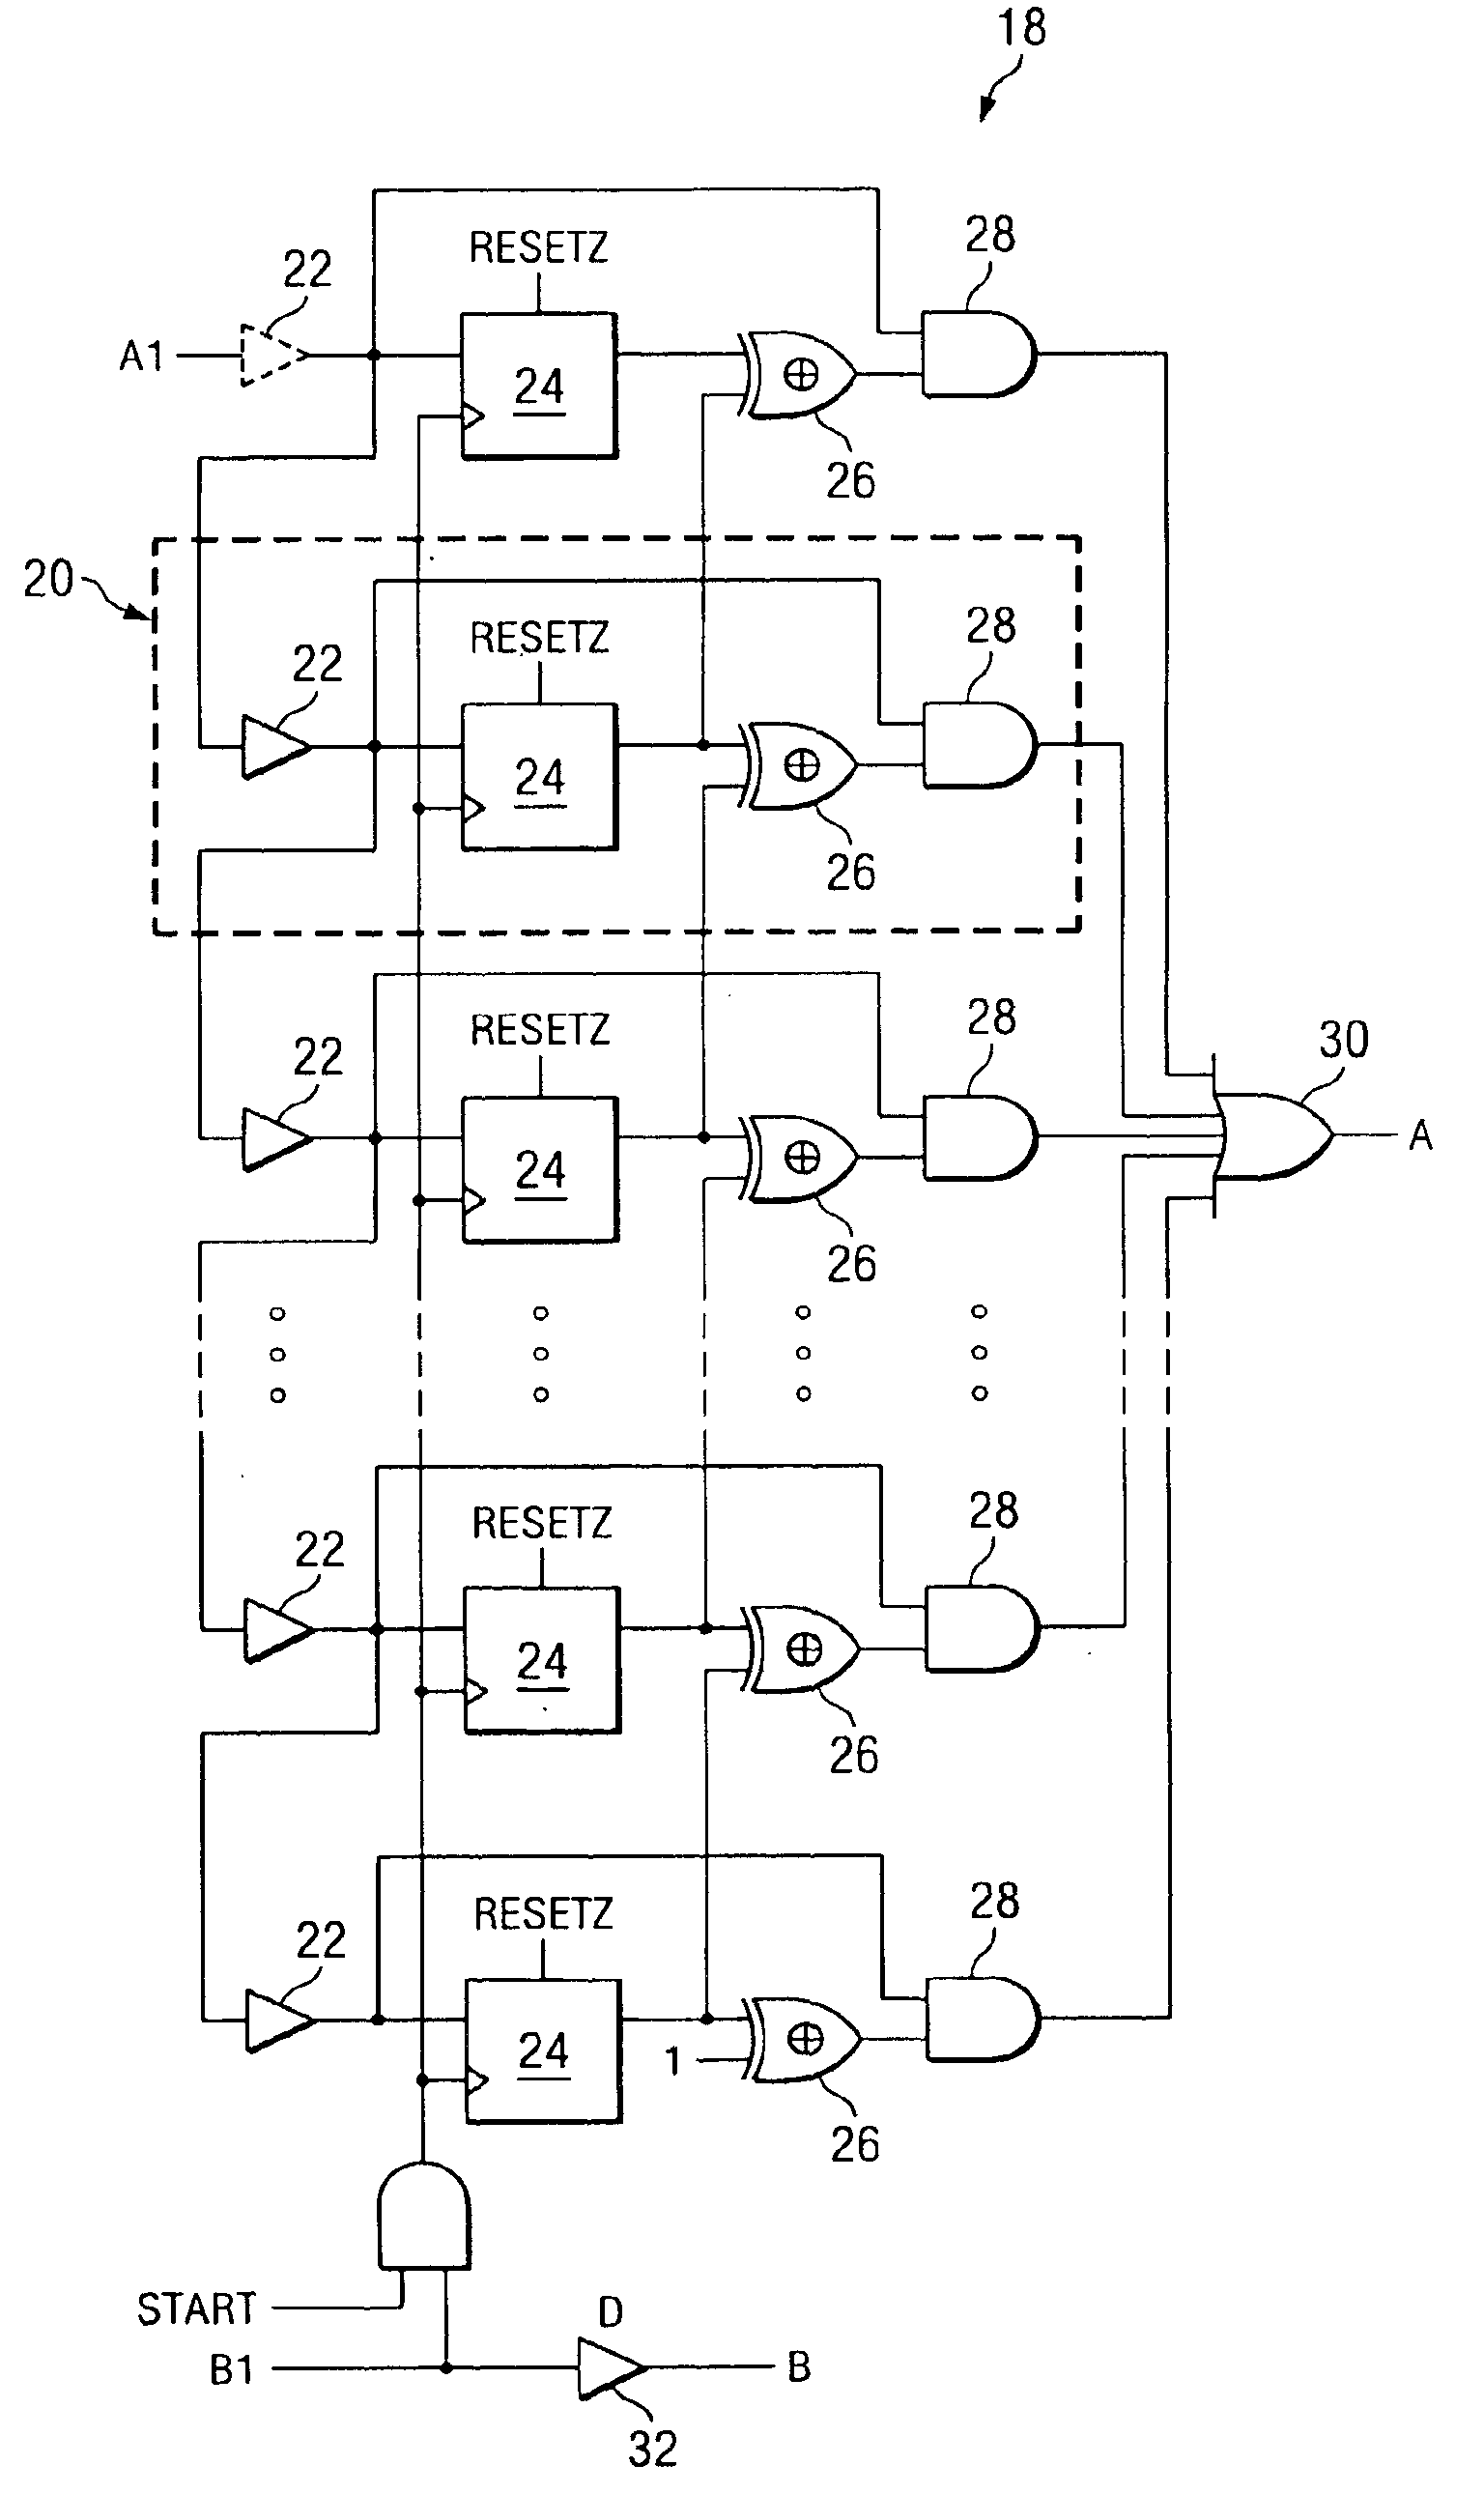 Circuitry for reducing the skew between two signals